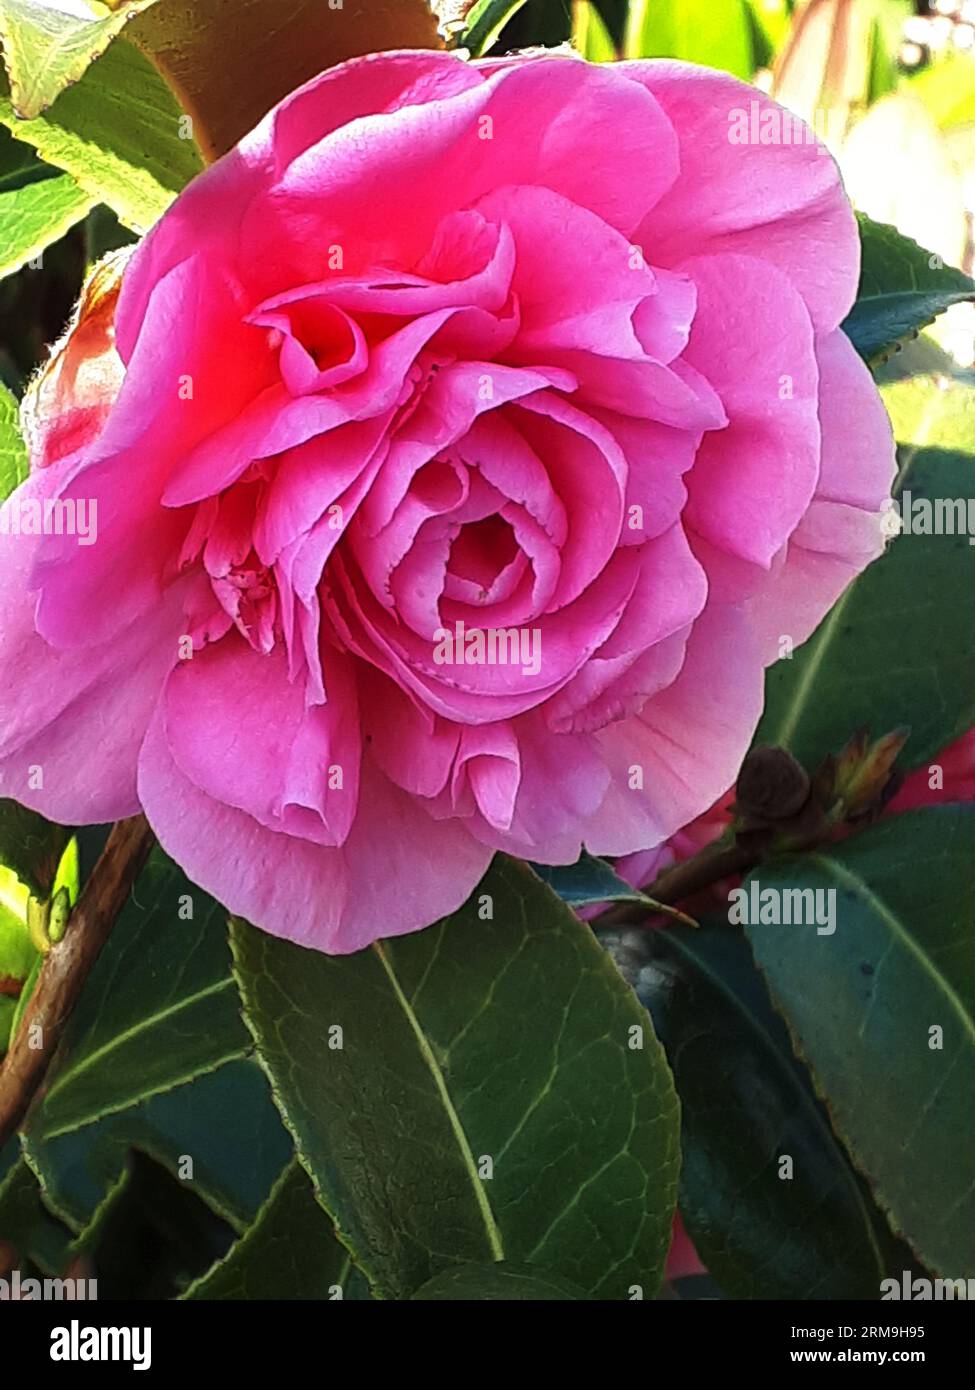 One of the early showy flowers of Spring in Burnley Northern England is the Camellia Japonica or Japanese Rose.It is the state flower of Alabama USA Stock Photo